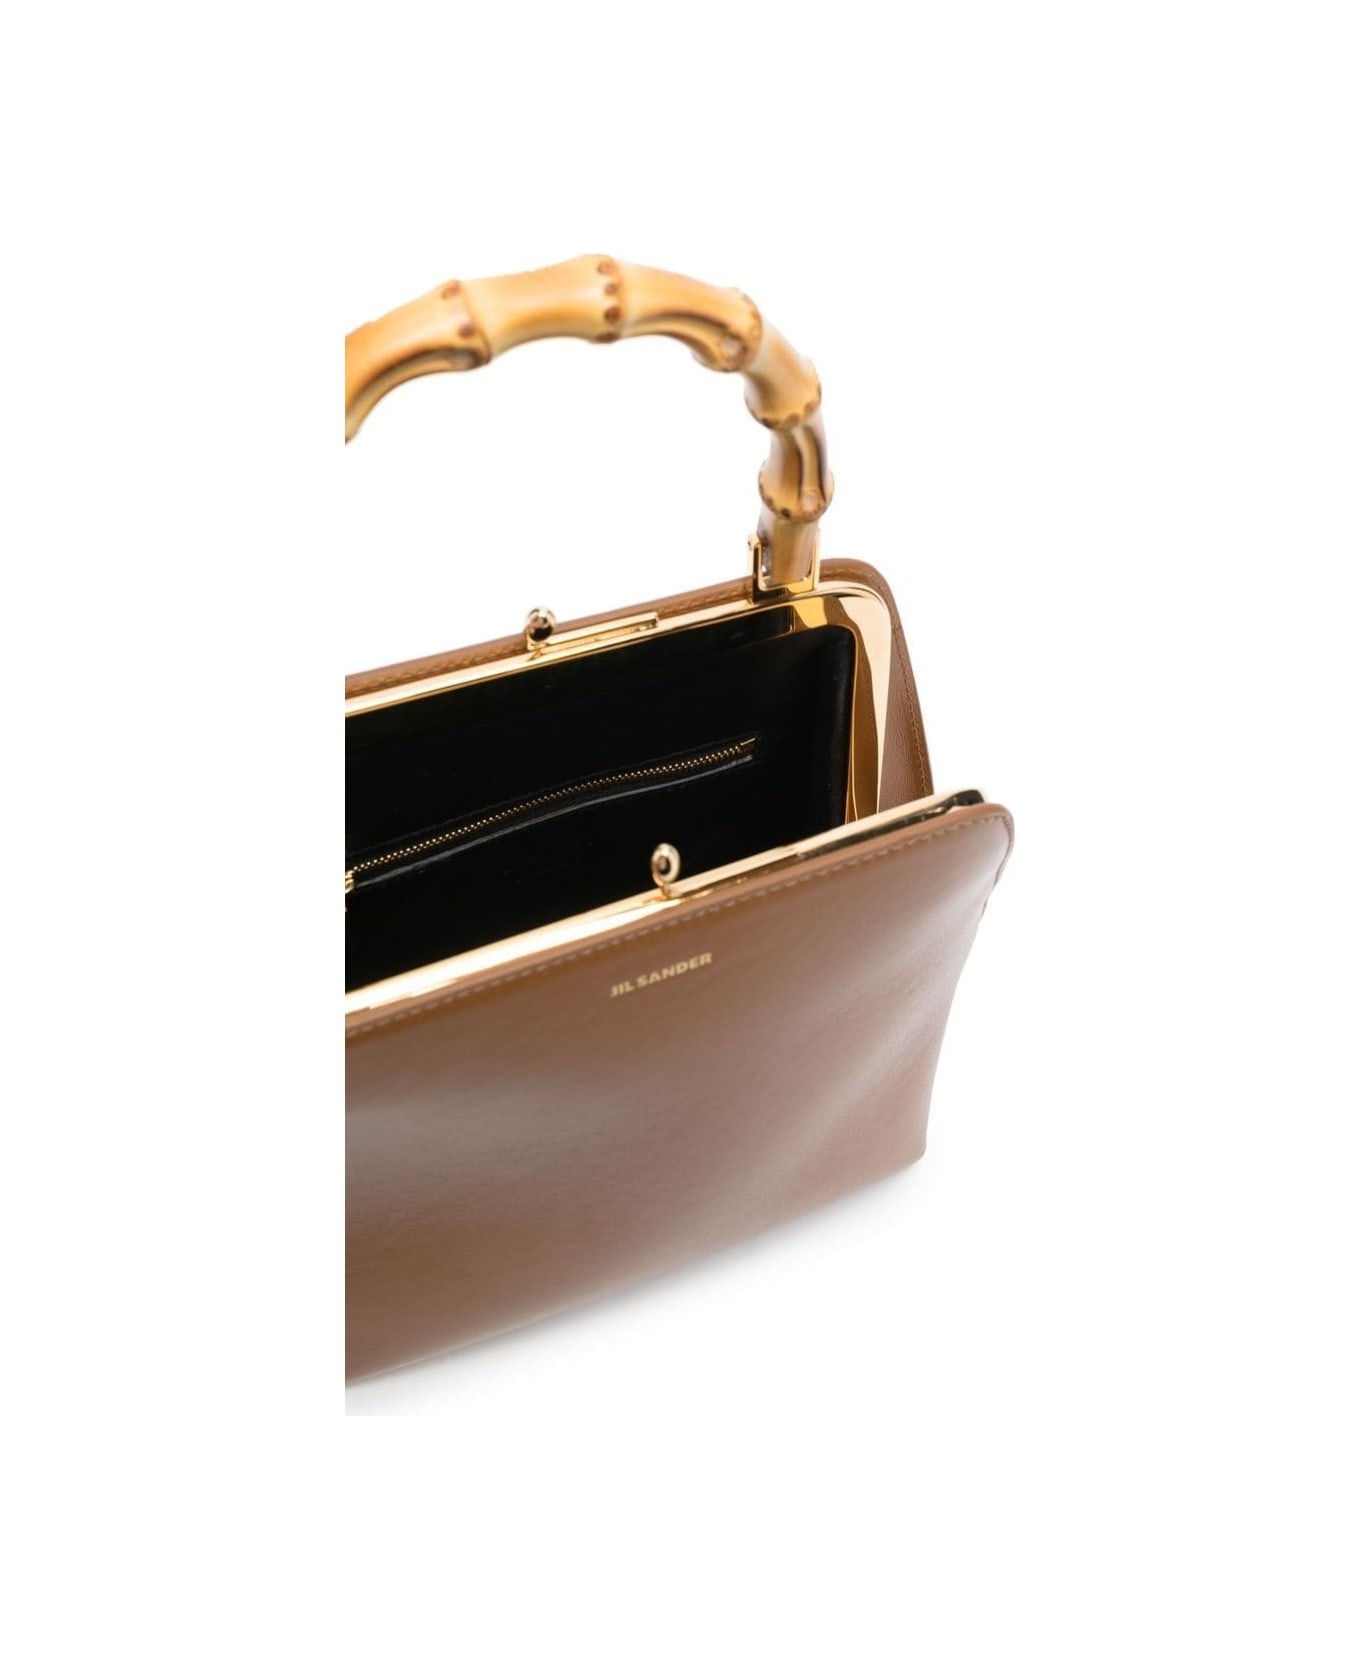 Jil Sander Brown Goji Square Handbag With Bamboo Handle In Leather Woman - Cammello トートバッグ